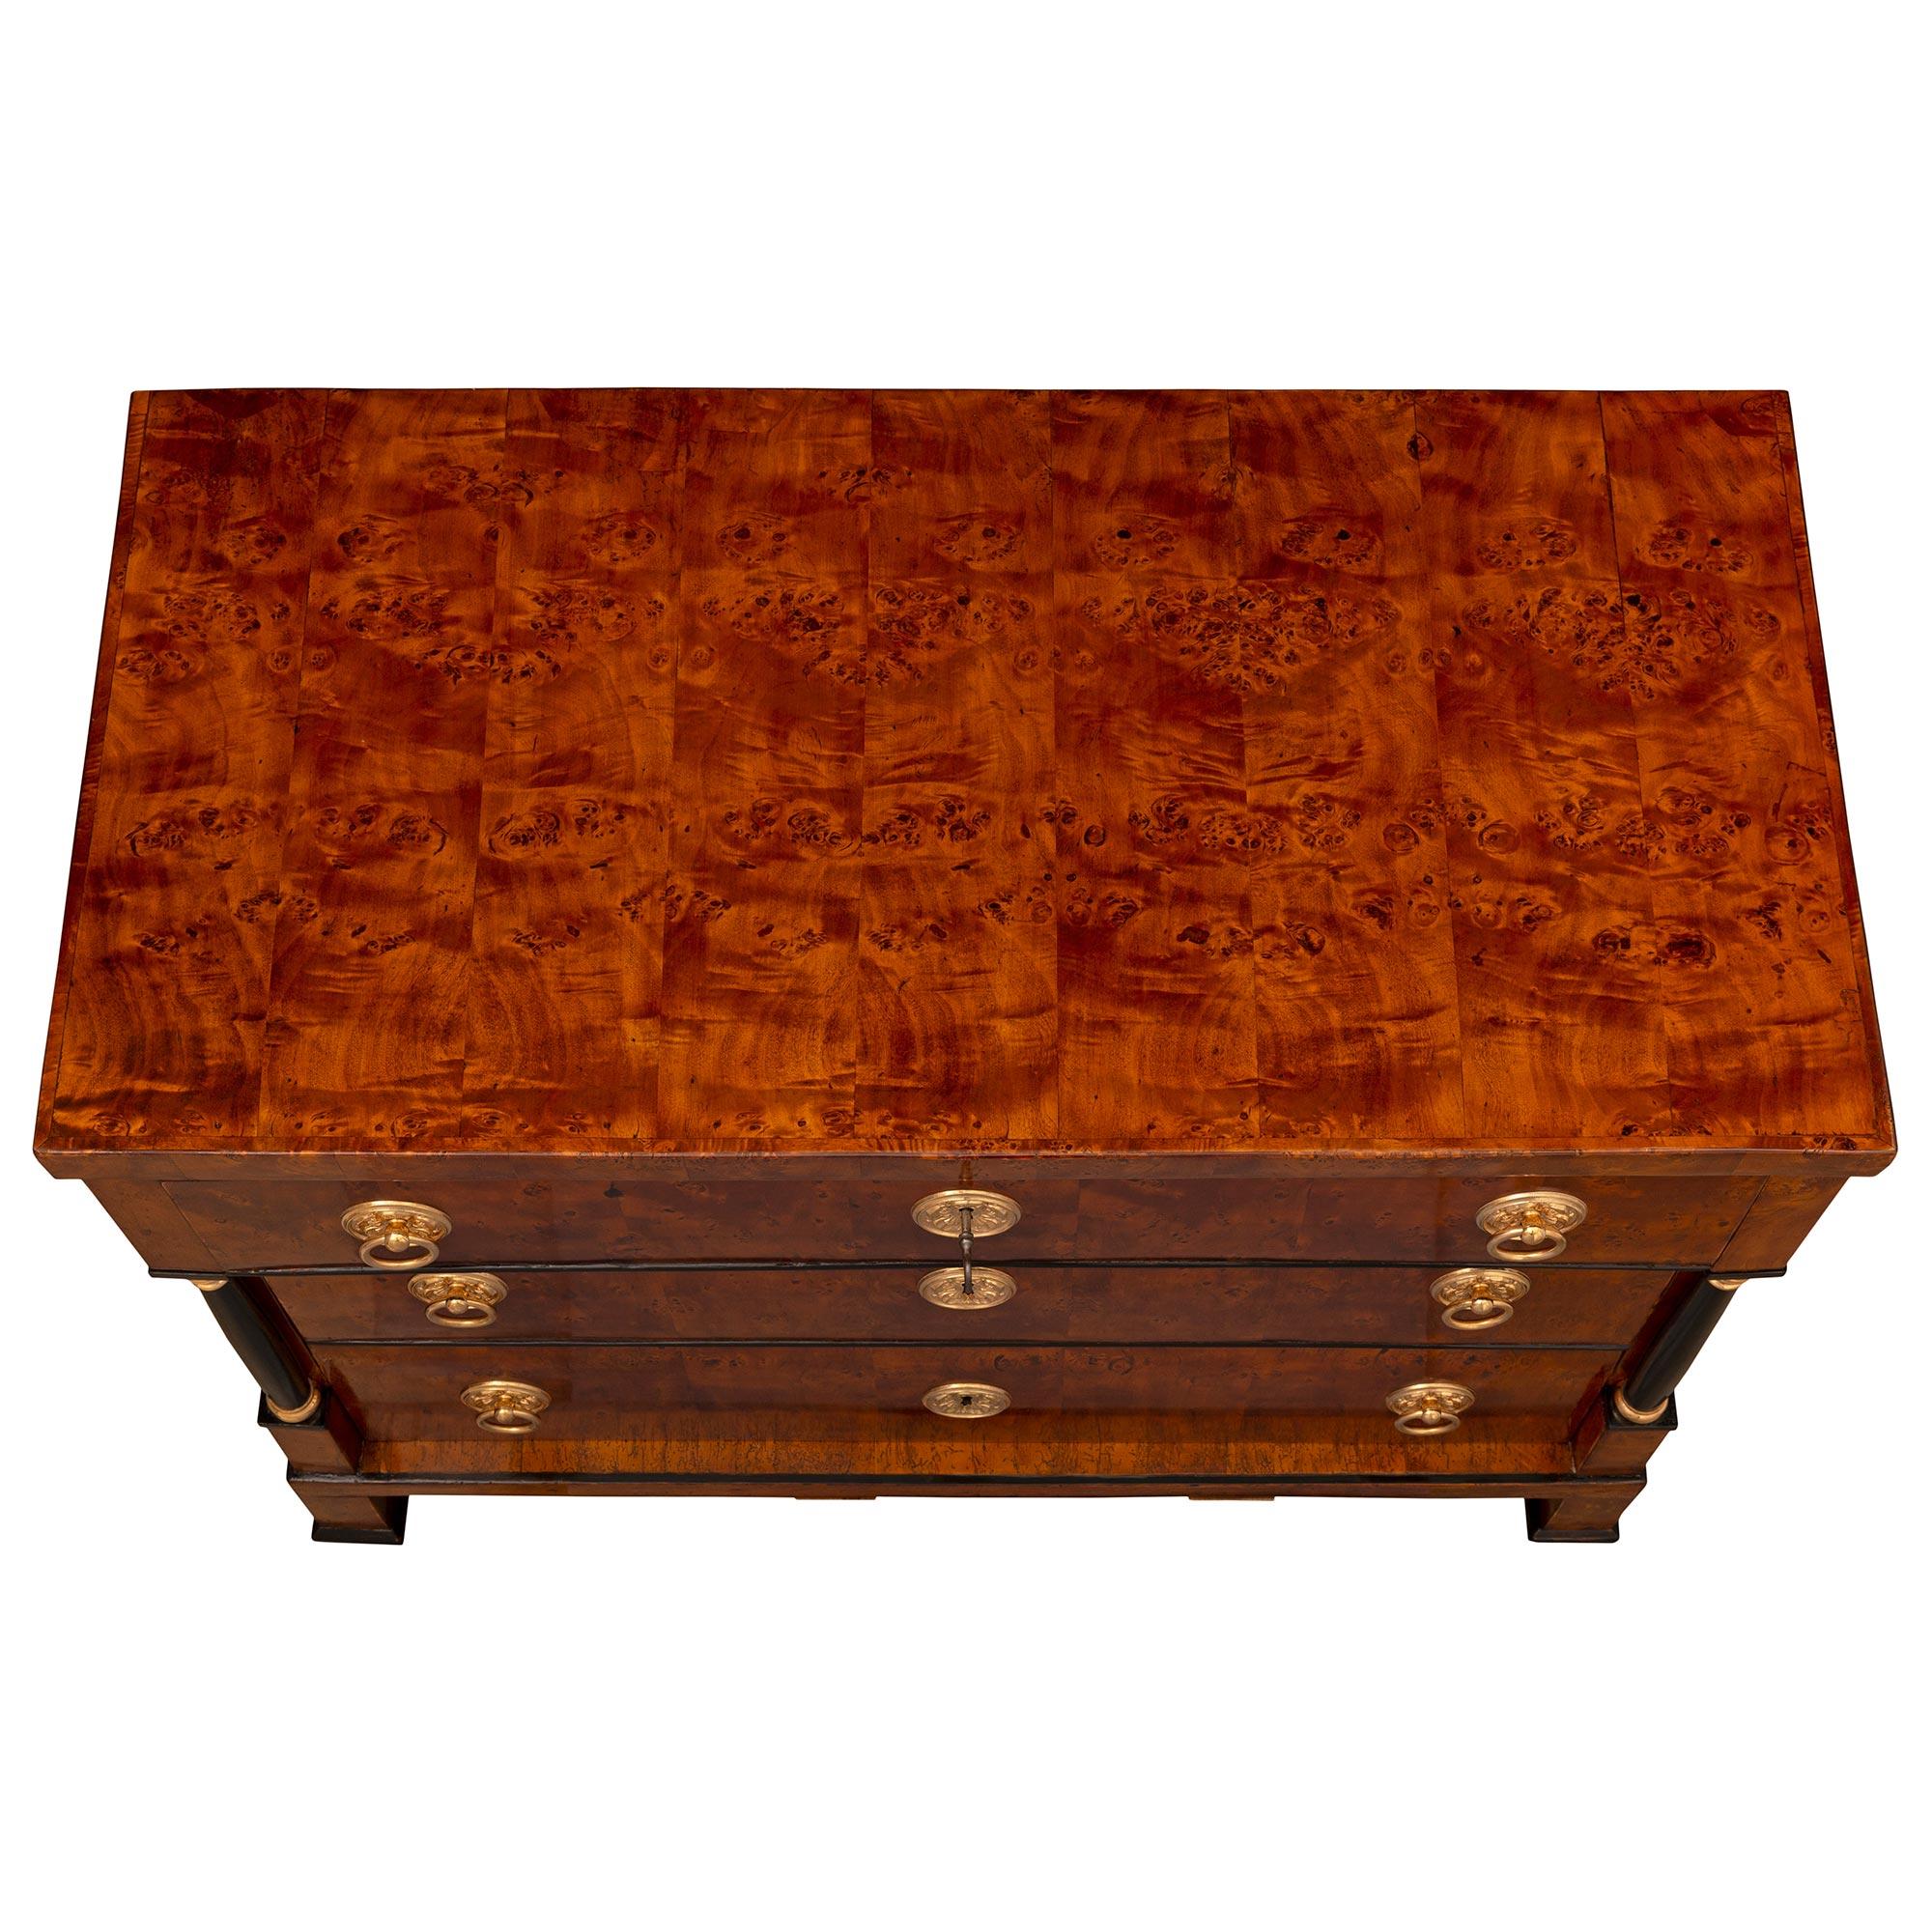 A stunning and most decorative Continental 19th century burl Birchwood, ebonized Fruitwood, and ormolu commode. The three-drawer chest is raised by elegant block legs with fine mottled feet. Above the straight frieze are the three drawers each